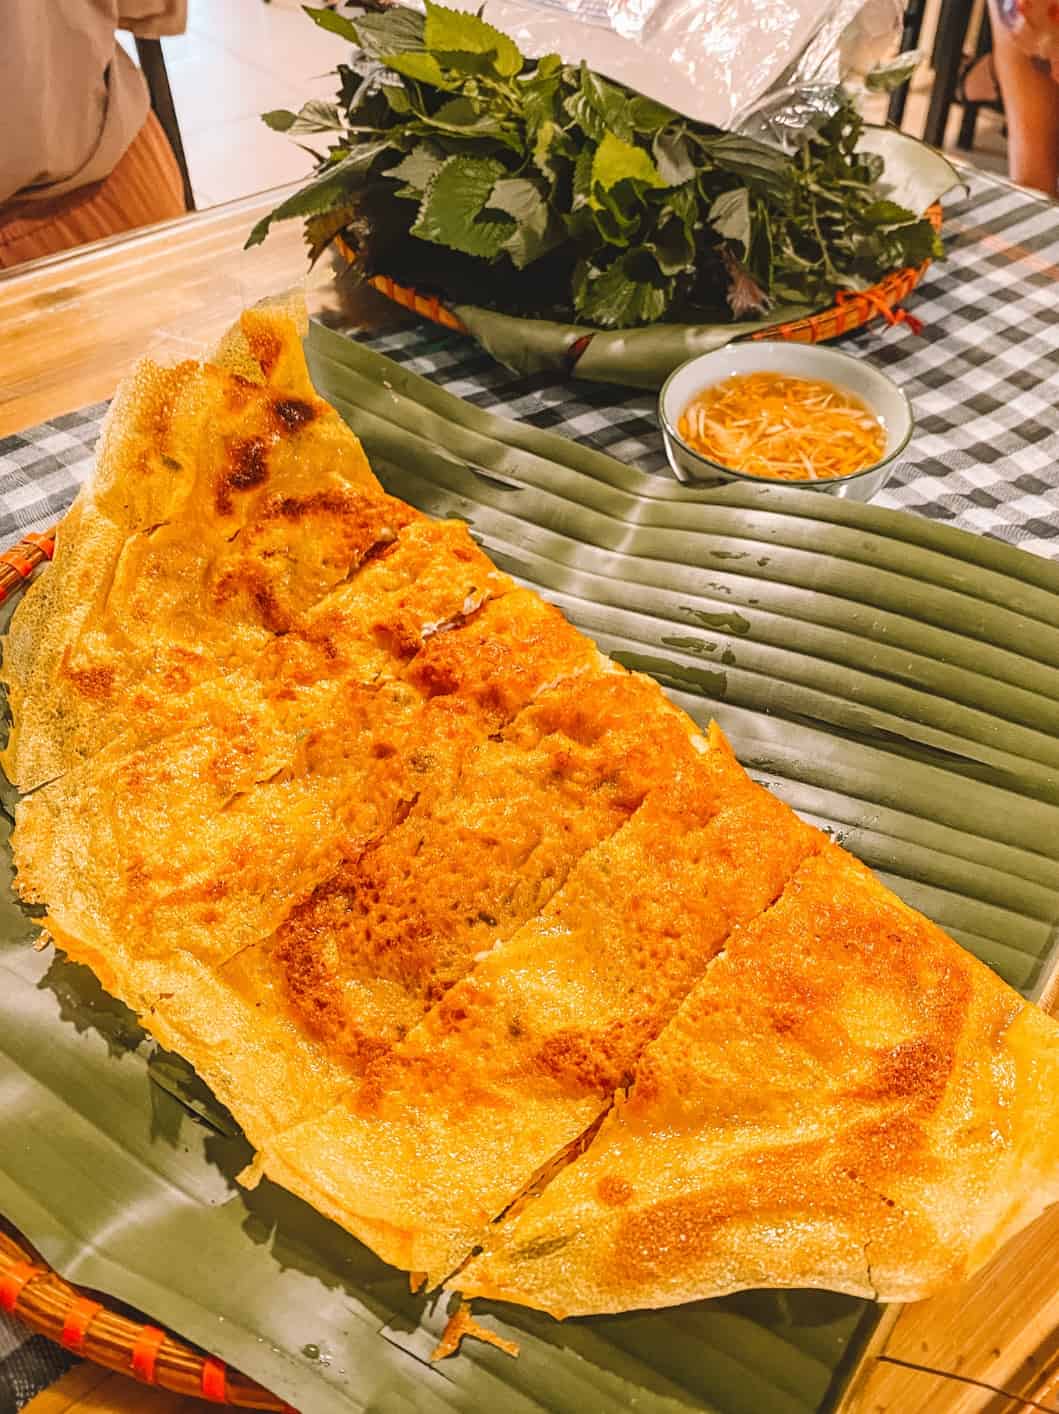 Crispy pancakes are popular in central Vietnam, but they're also some of the best street food in Hanoi